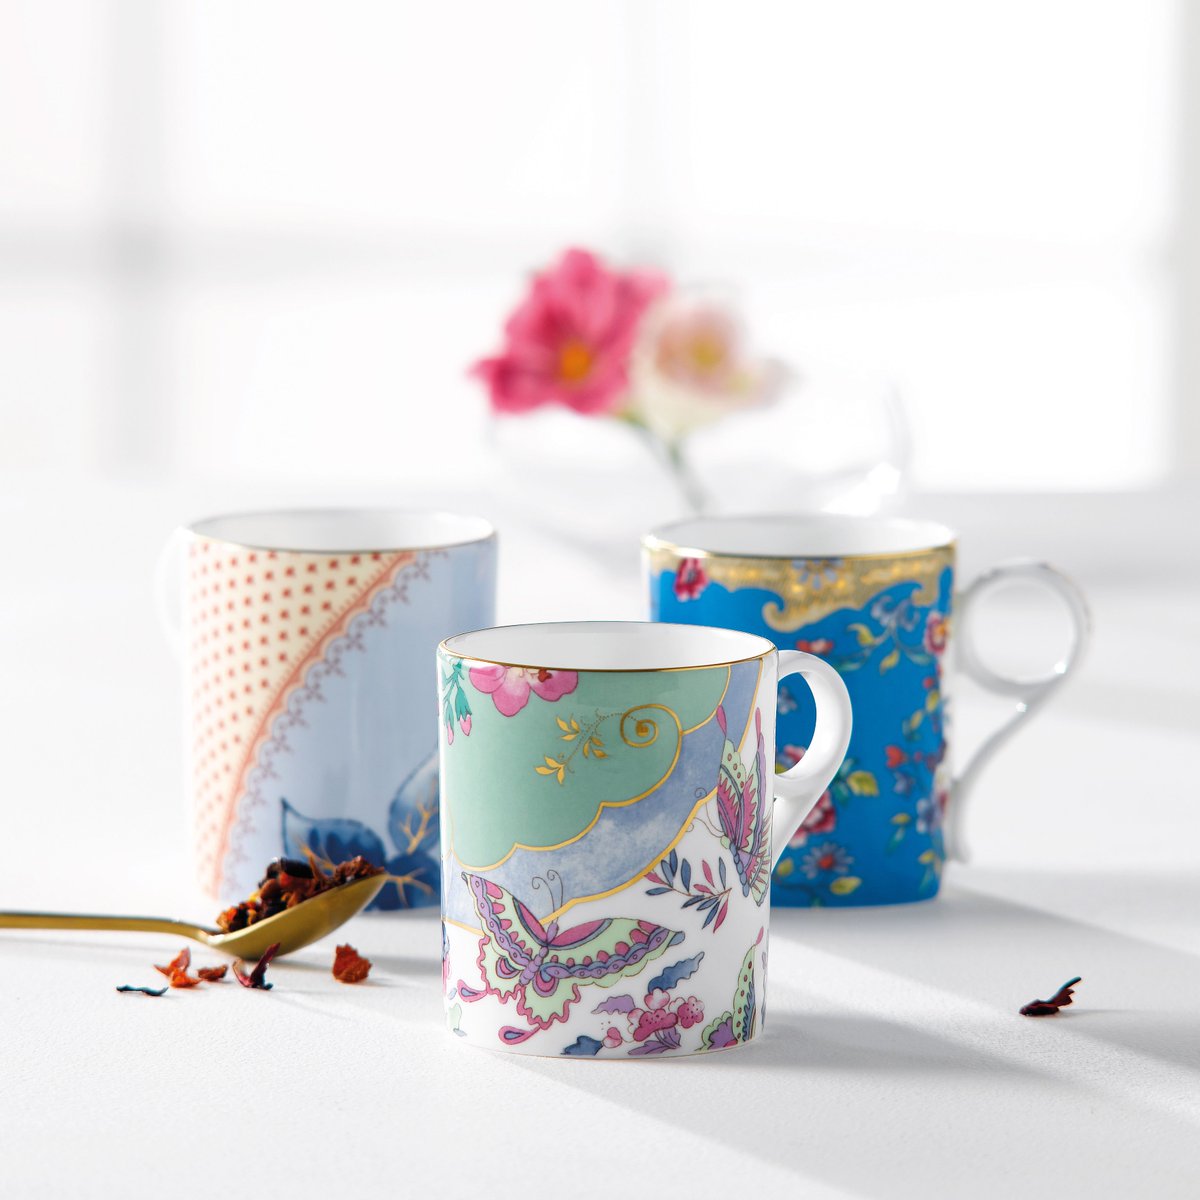 A gift to be treasured - Wonderlust is made up of colourful, eclectic designs inspired by the exceptional beauty of exotic florals and plants from the different continents. The perfect gift for a stylish tea lover ☕️ Click here to browse Wonderlust: bit.ly/2CgT0eE